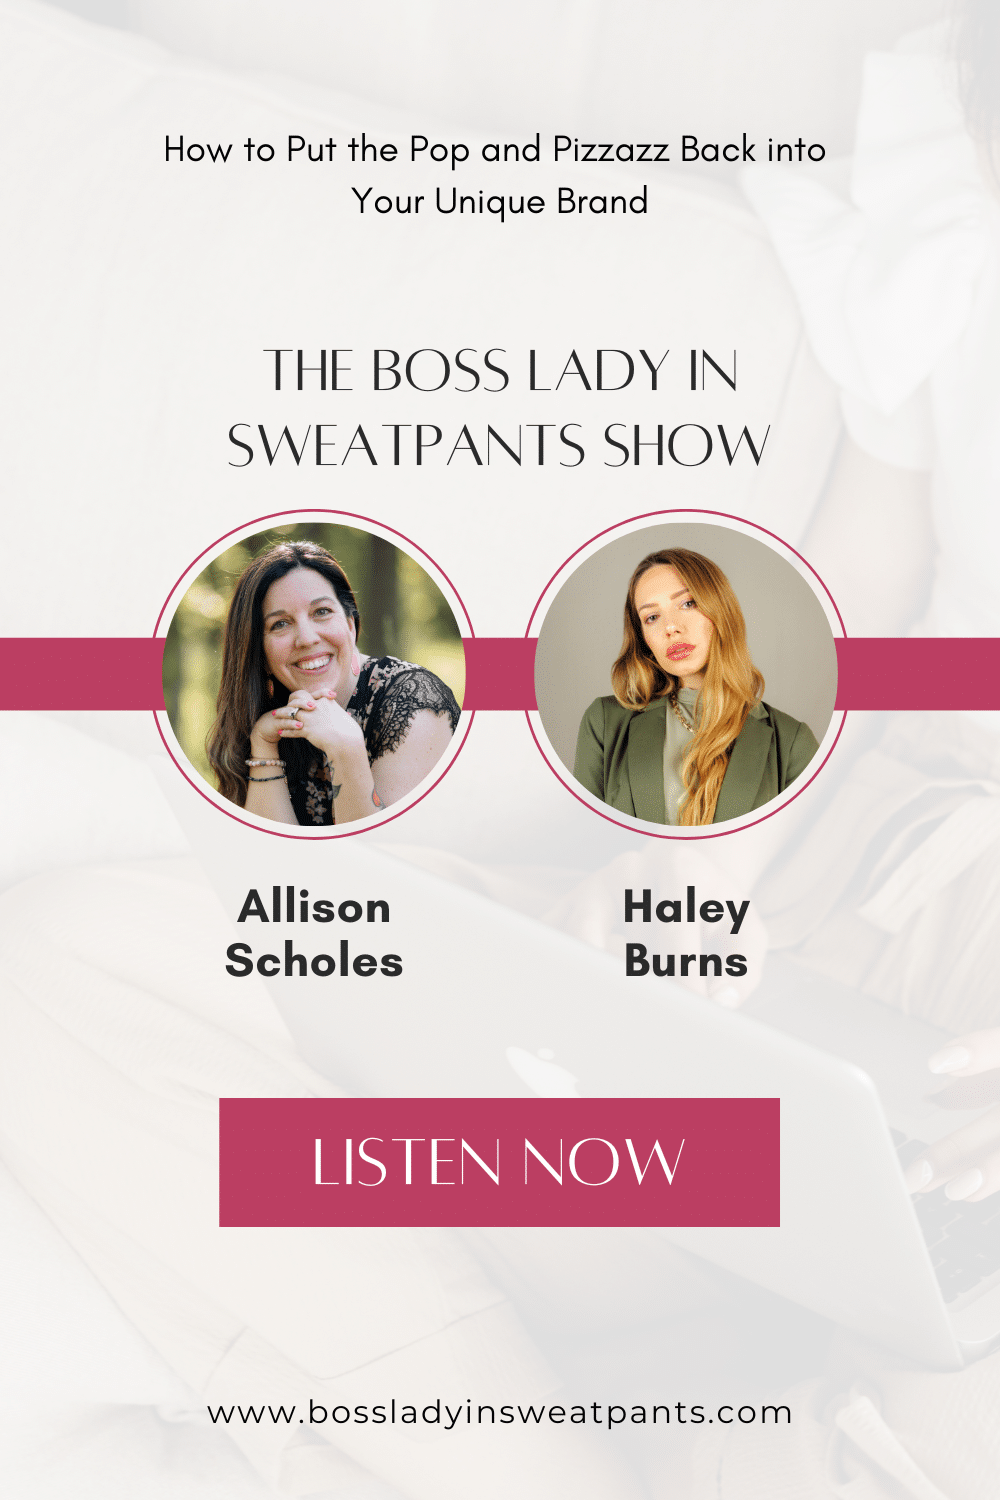 faded graphic with two photos of women: Allison Scholes (podcast host) and Haley Burns (guest) for The Boss Lady in Sweatpants Show